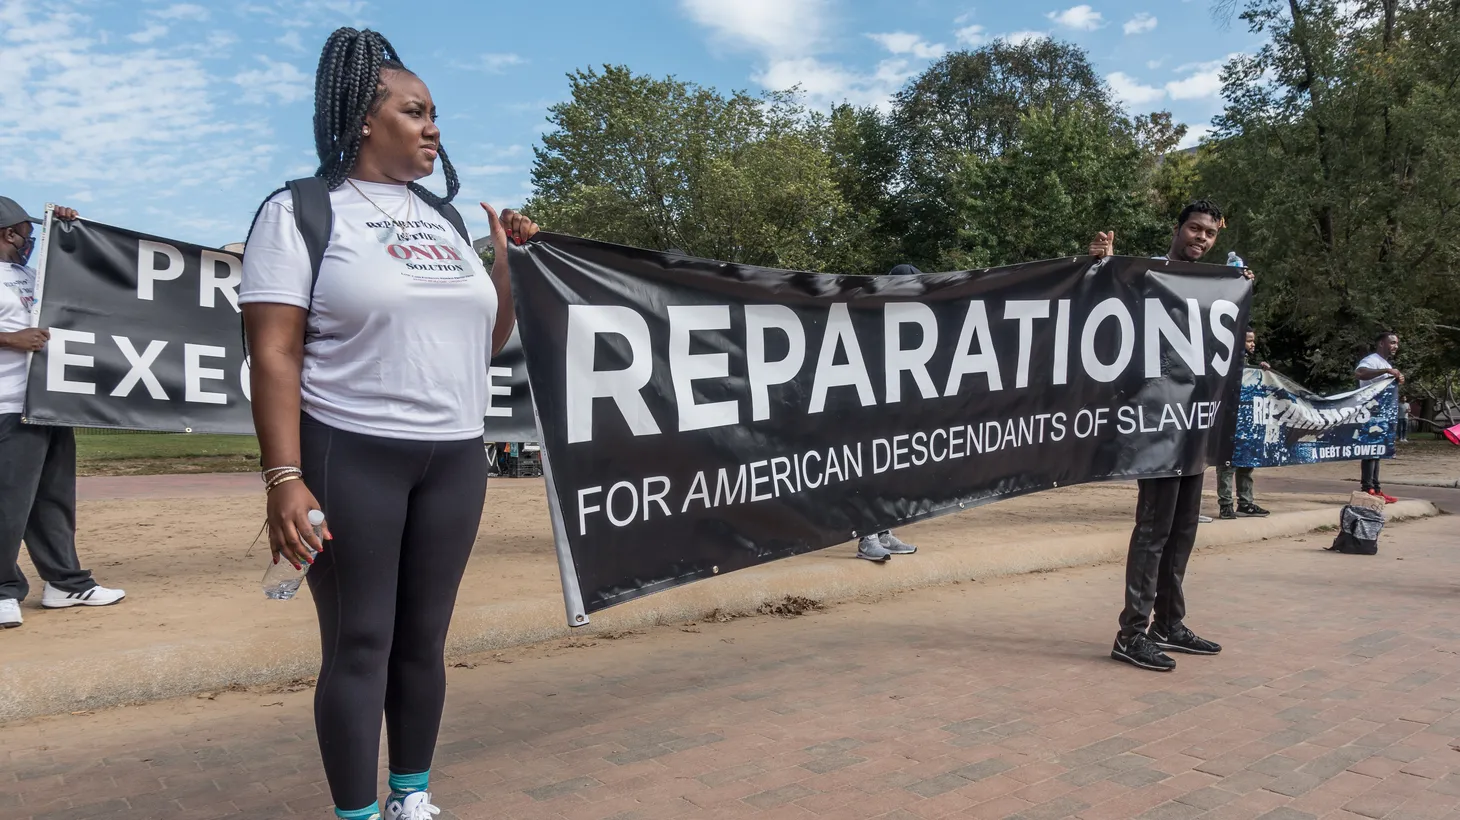 Activists hold a sign pushing for reparations for American descendants of enslaved people.